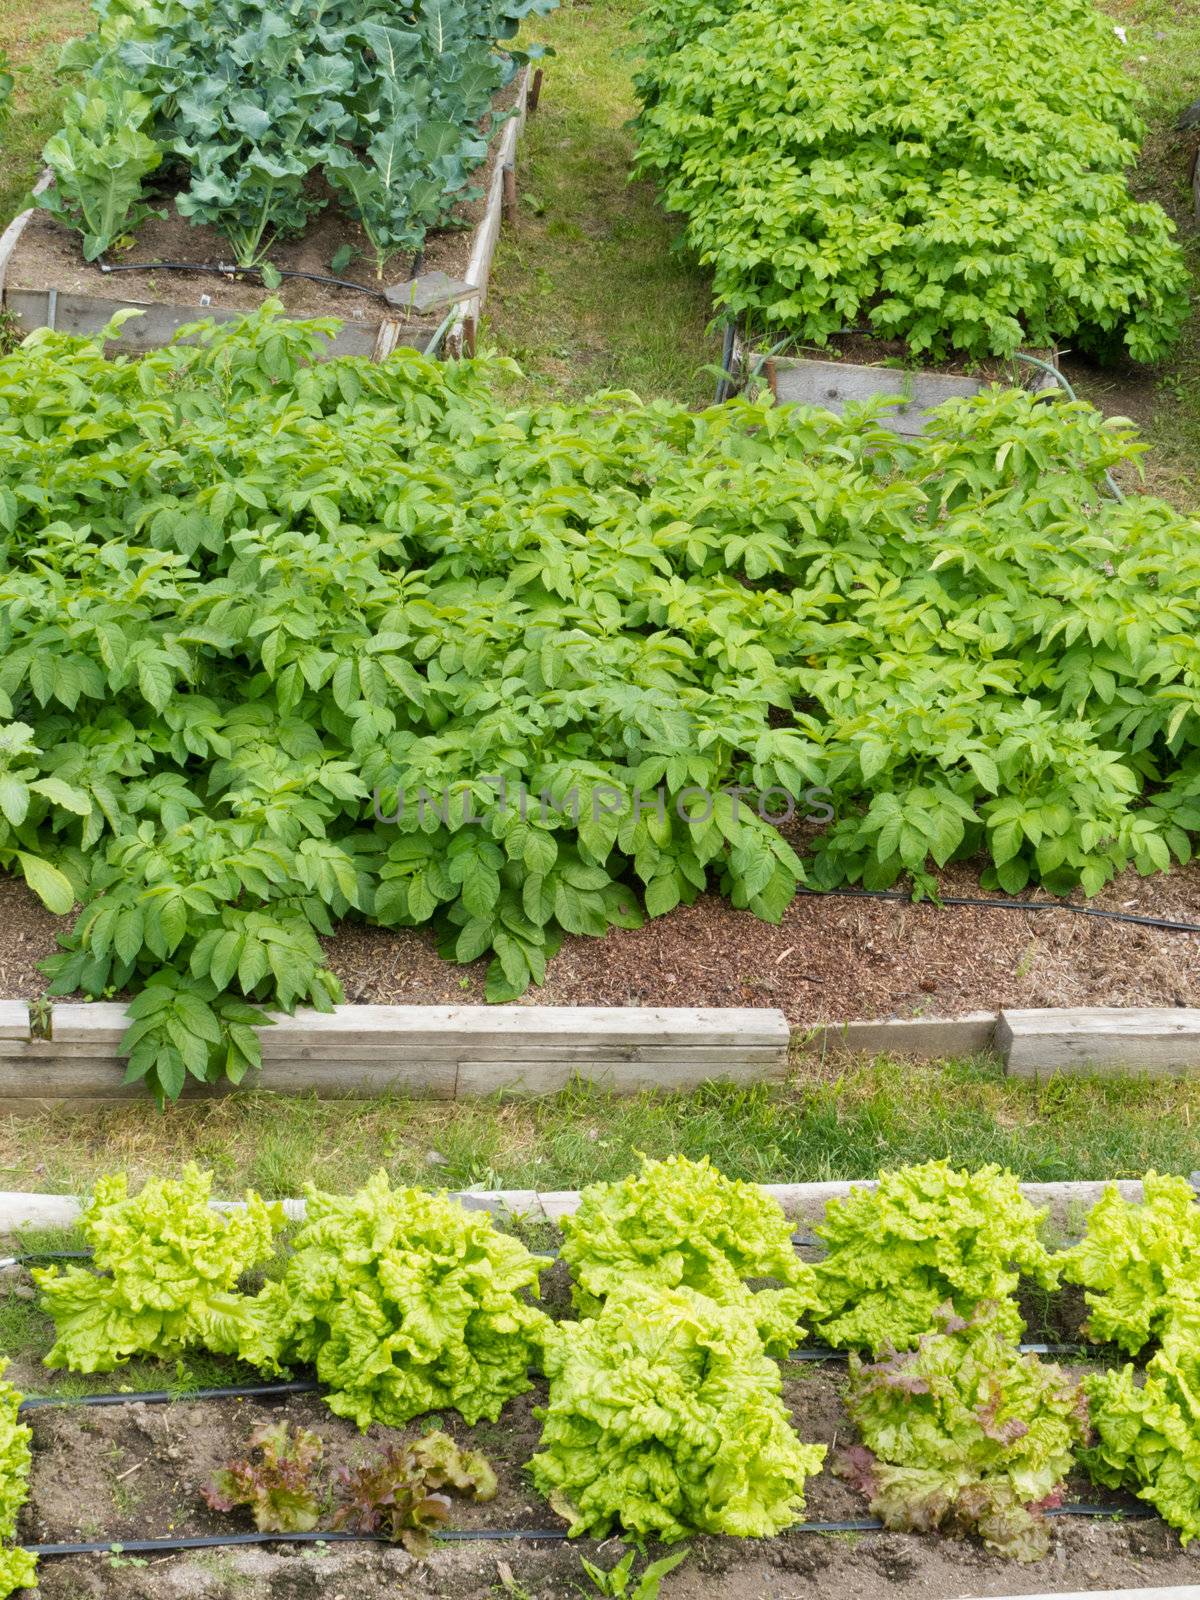 Raised beds of various vegetable plants potatoes by PiLens